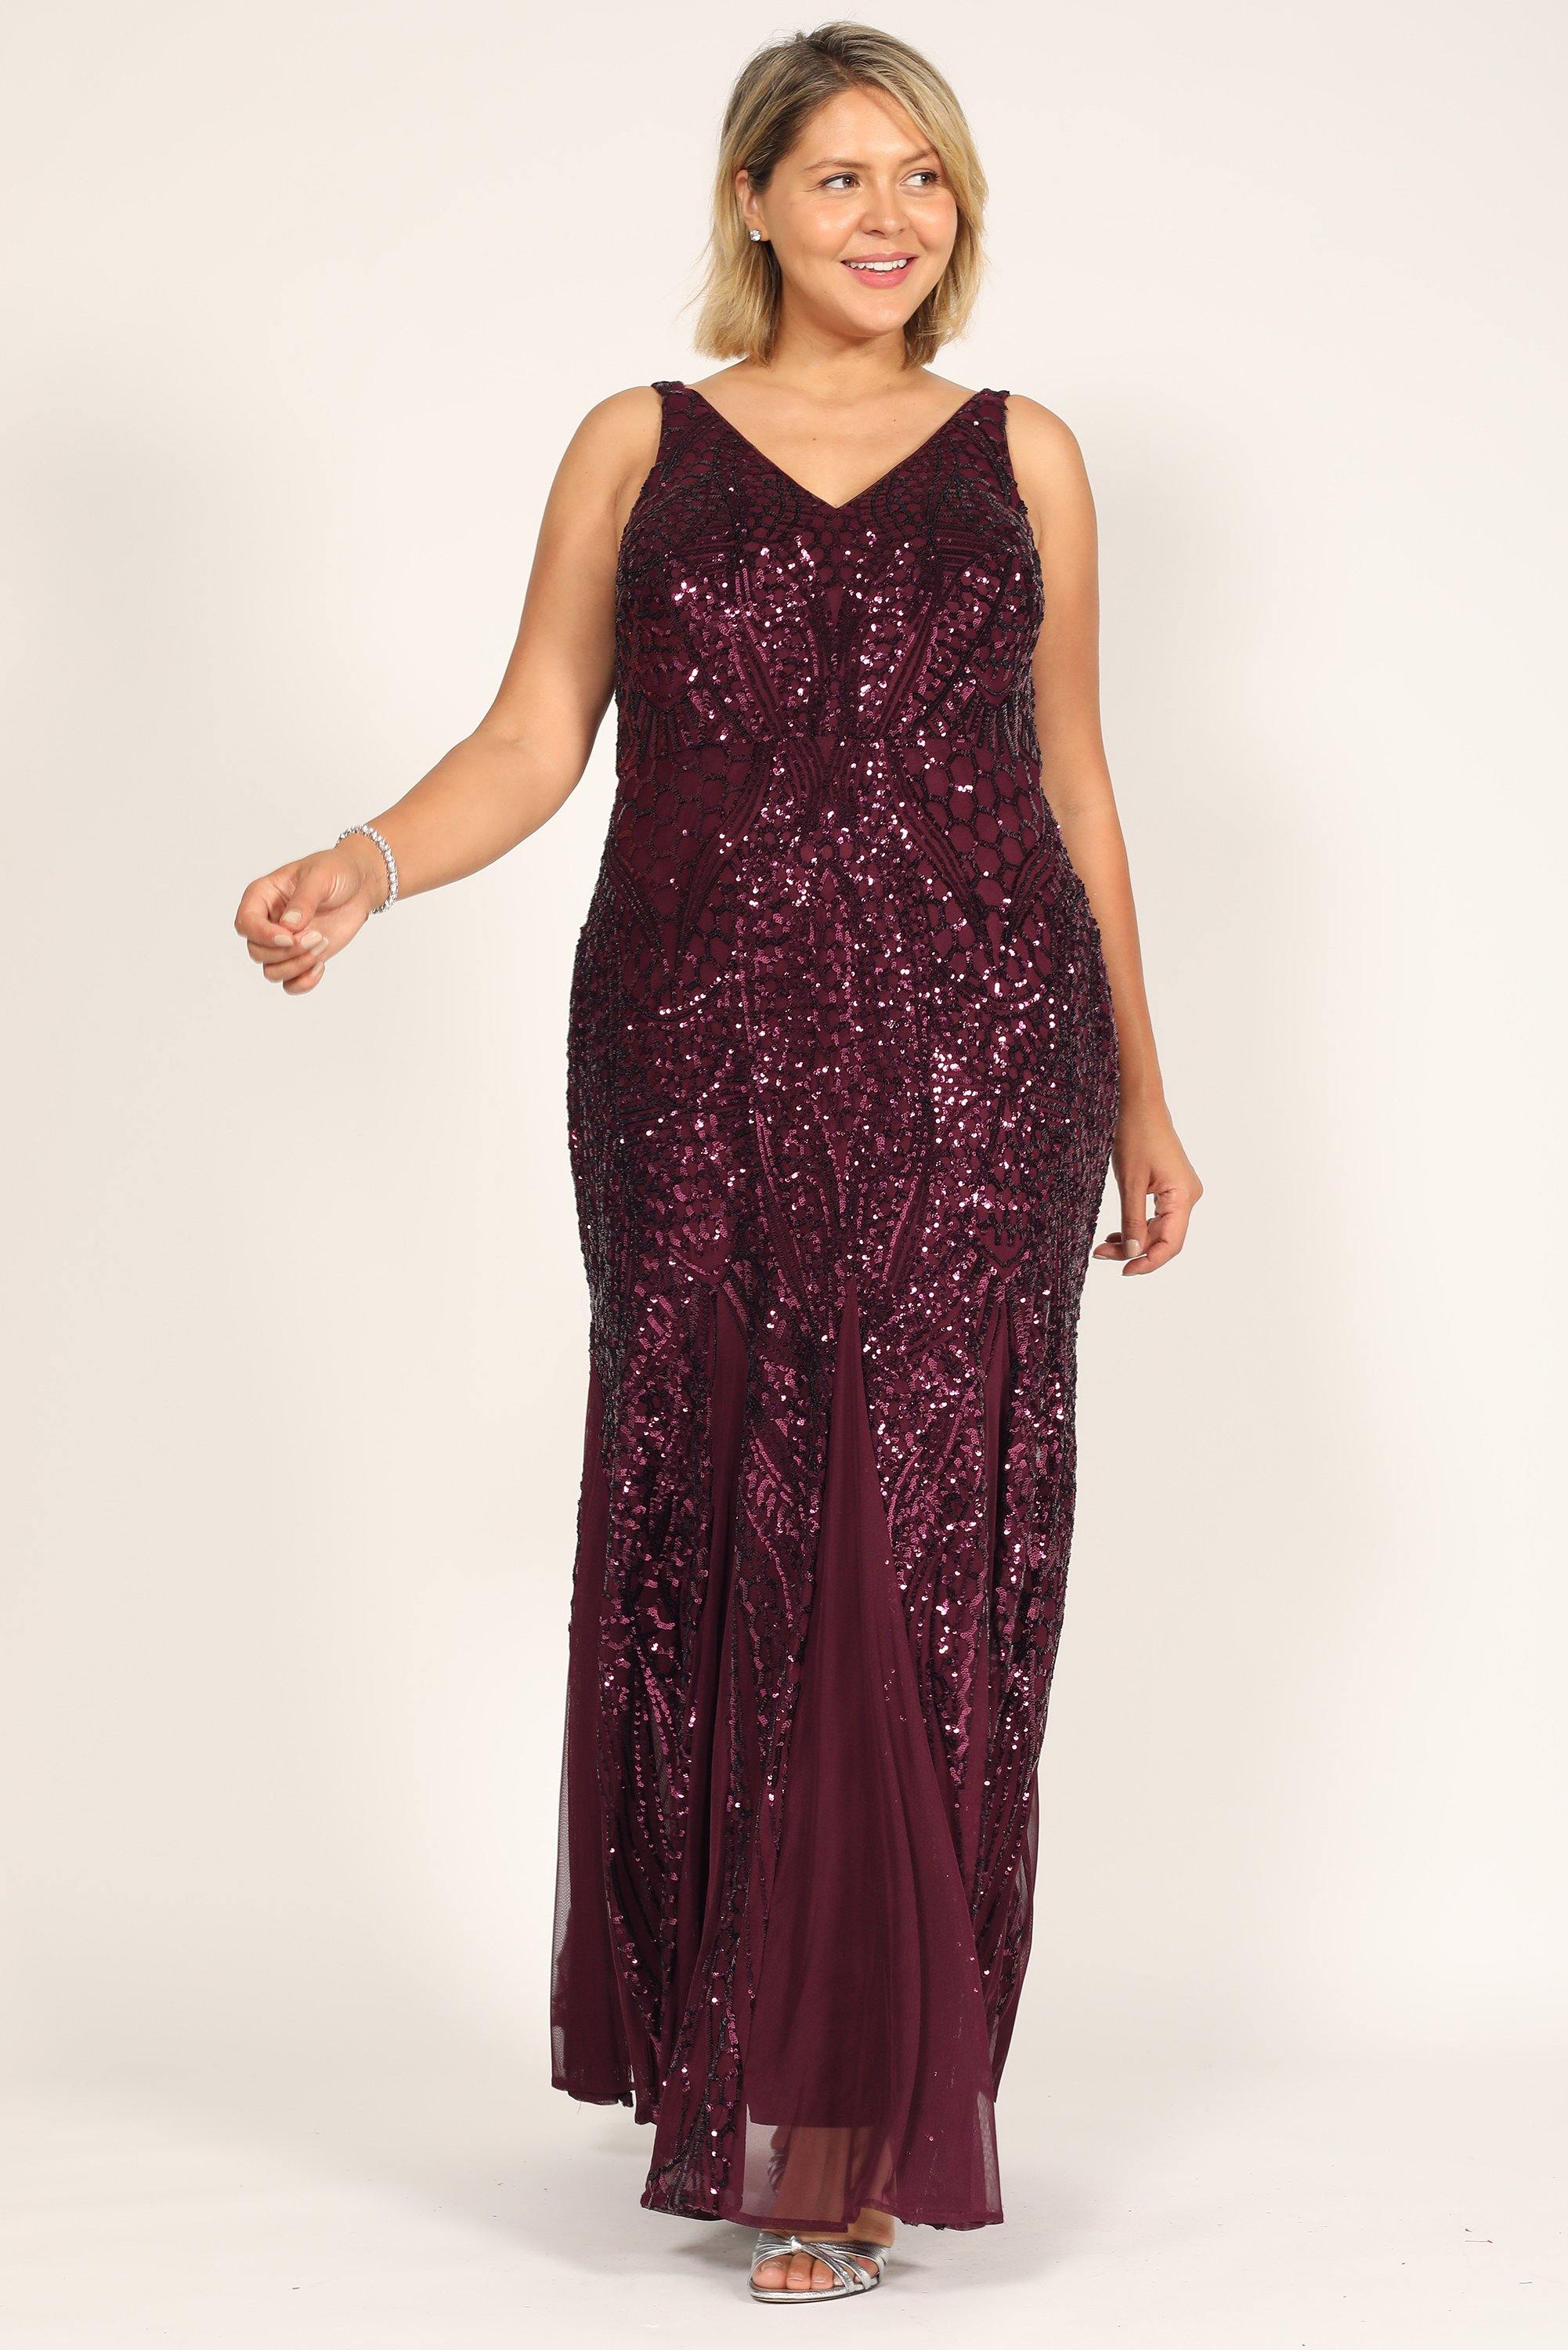 Plum Nightway Long Plus Size Beaded Formal Gown 21685W for $114.99 ...